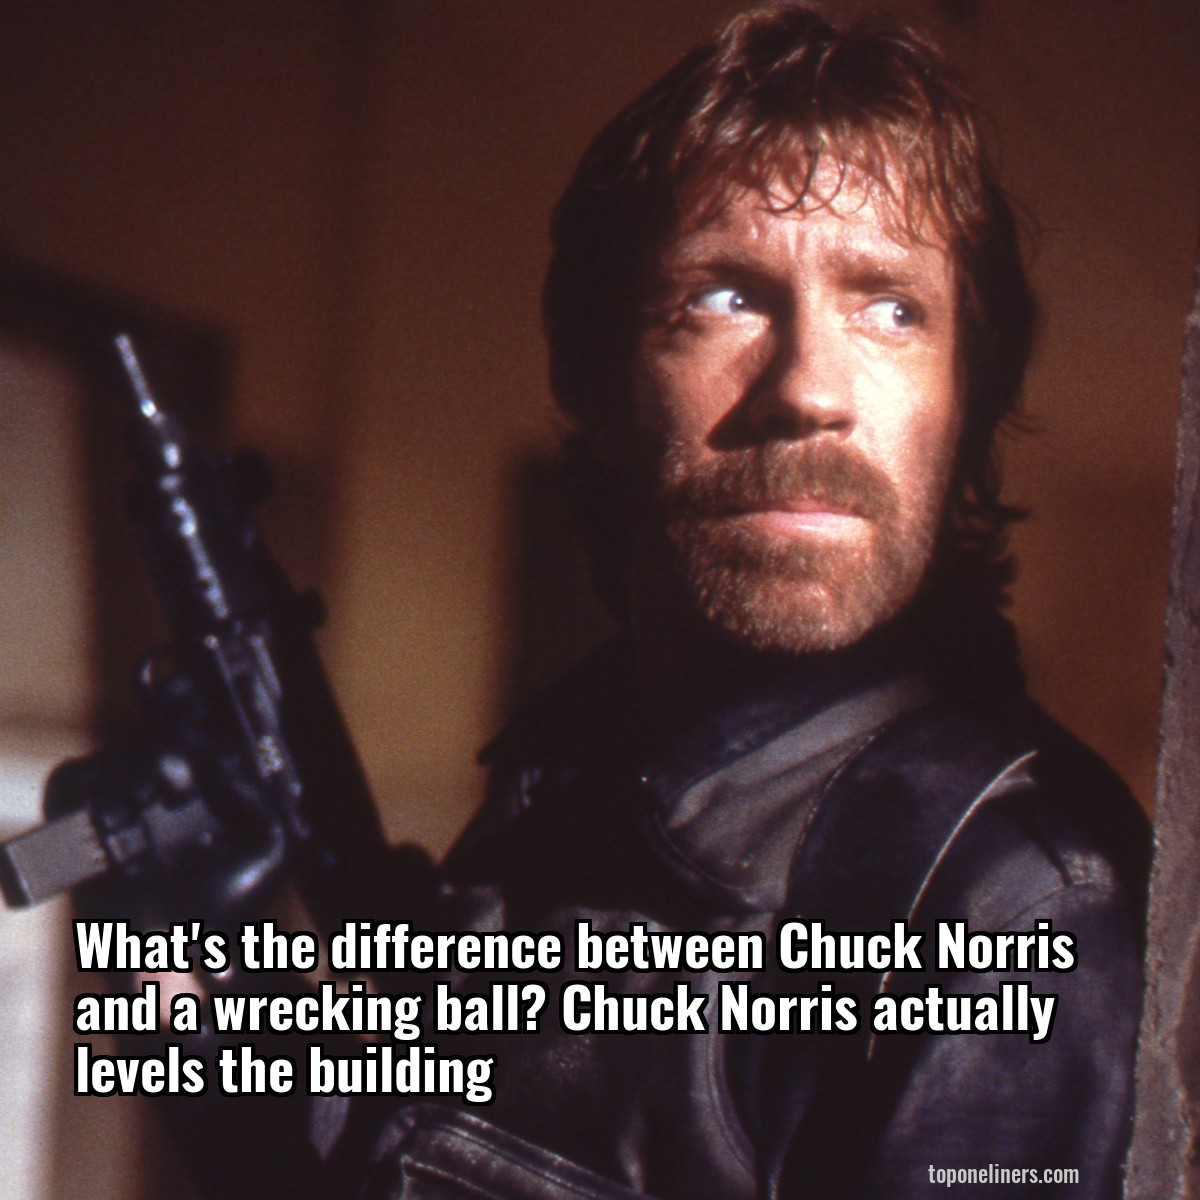 What's the difference between Chuck Norris and a wrecking ball? Chuck Norris actually levels the building